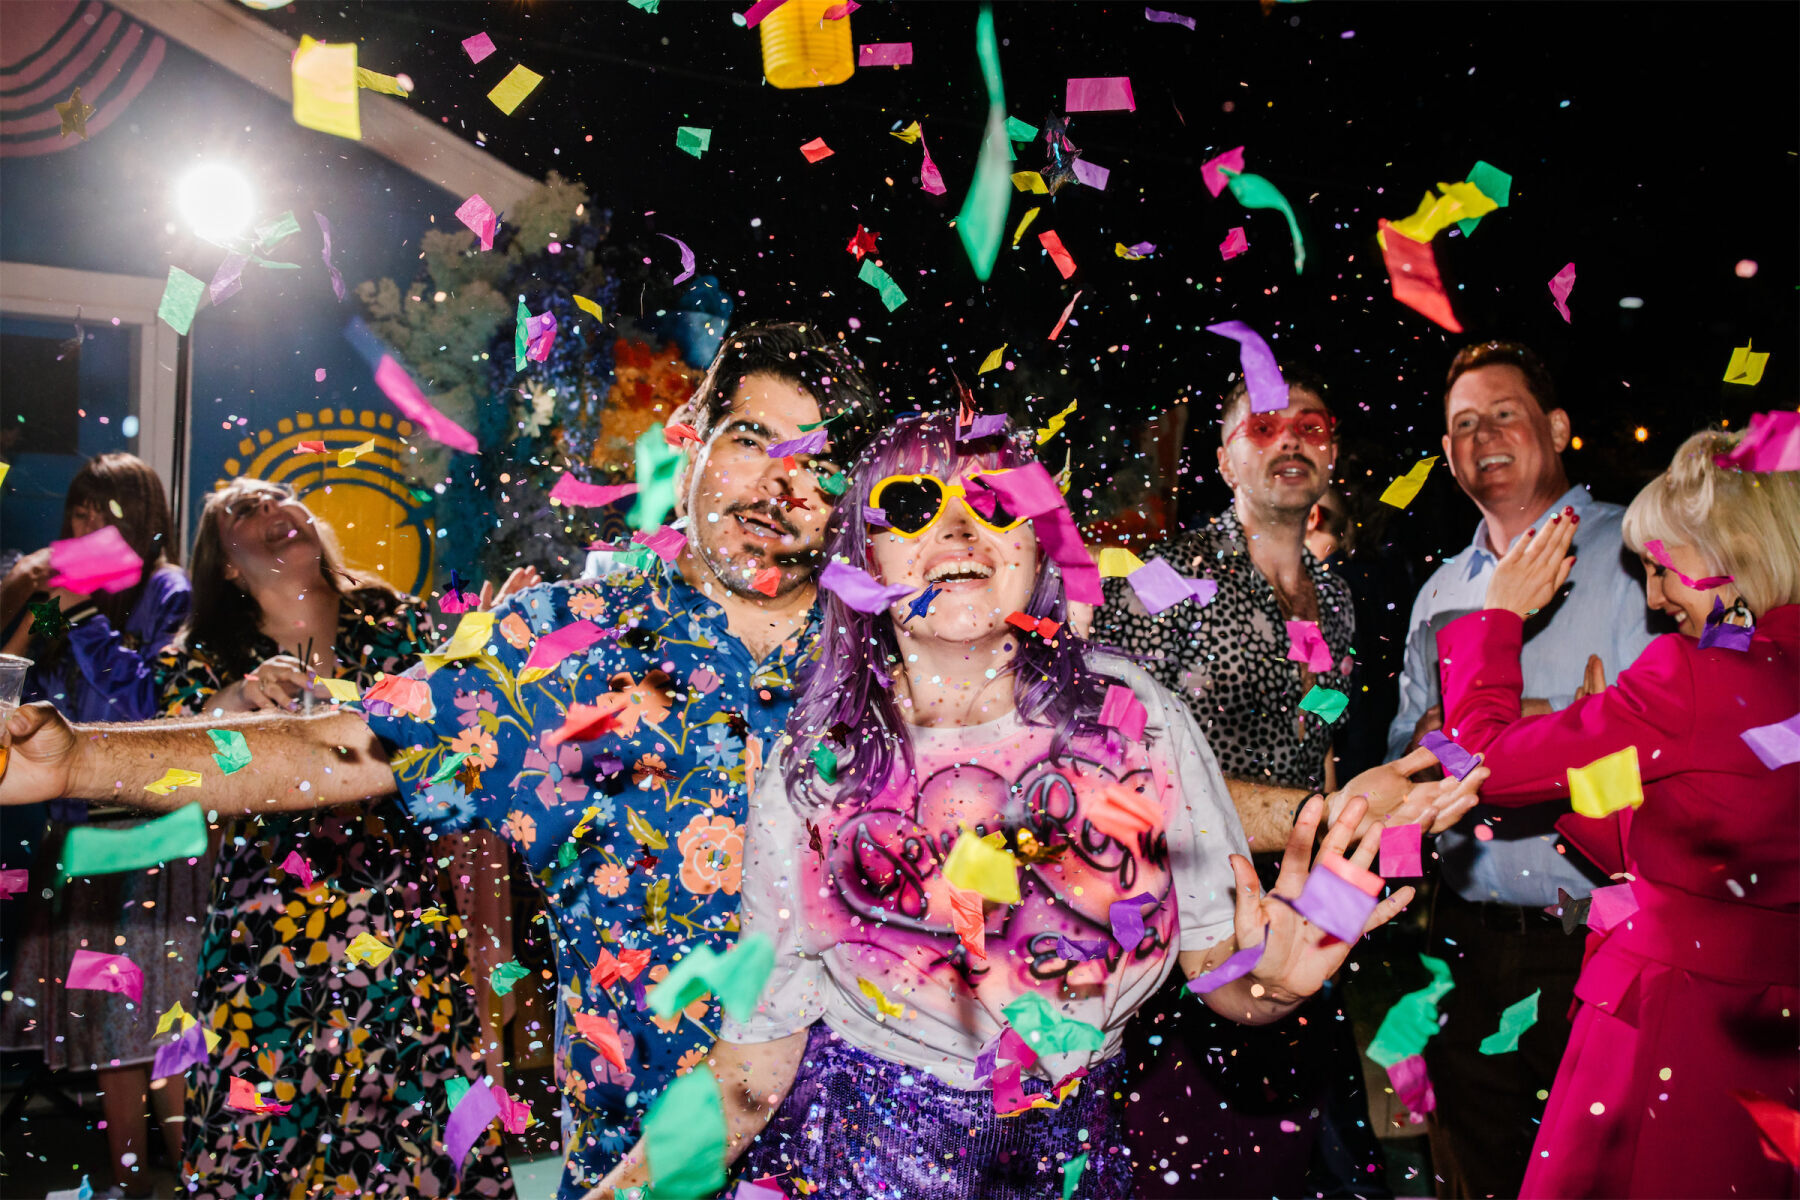 Colorful confetti floats in the air as a pair of newlyweds enjoy the atmosphere of their vibrant outdoor wedding reception.